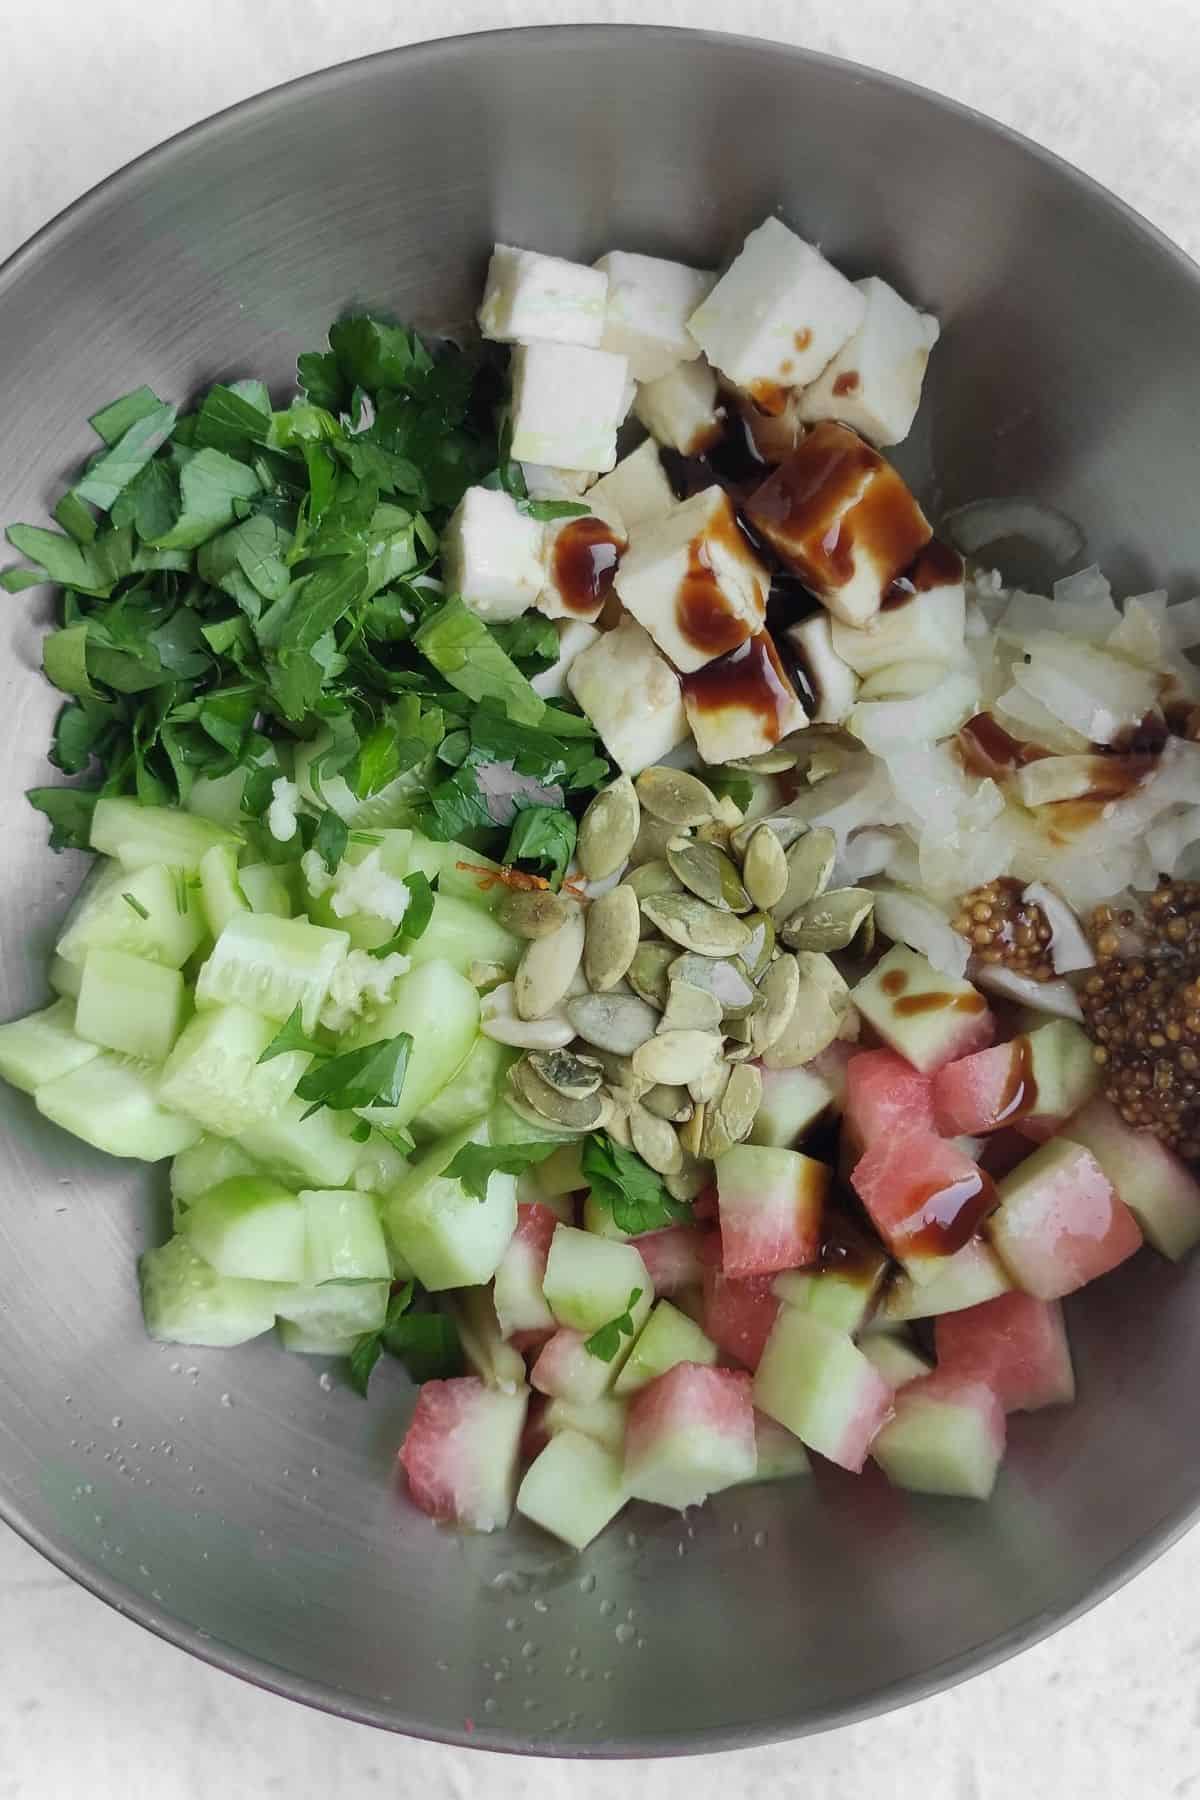 Mixing all of the ingredients together in a mixing bowl.